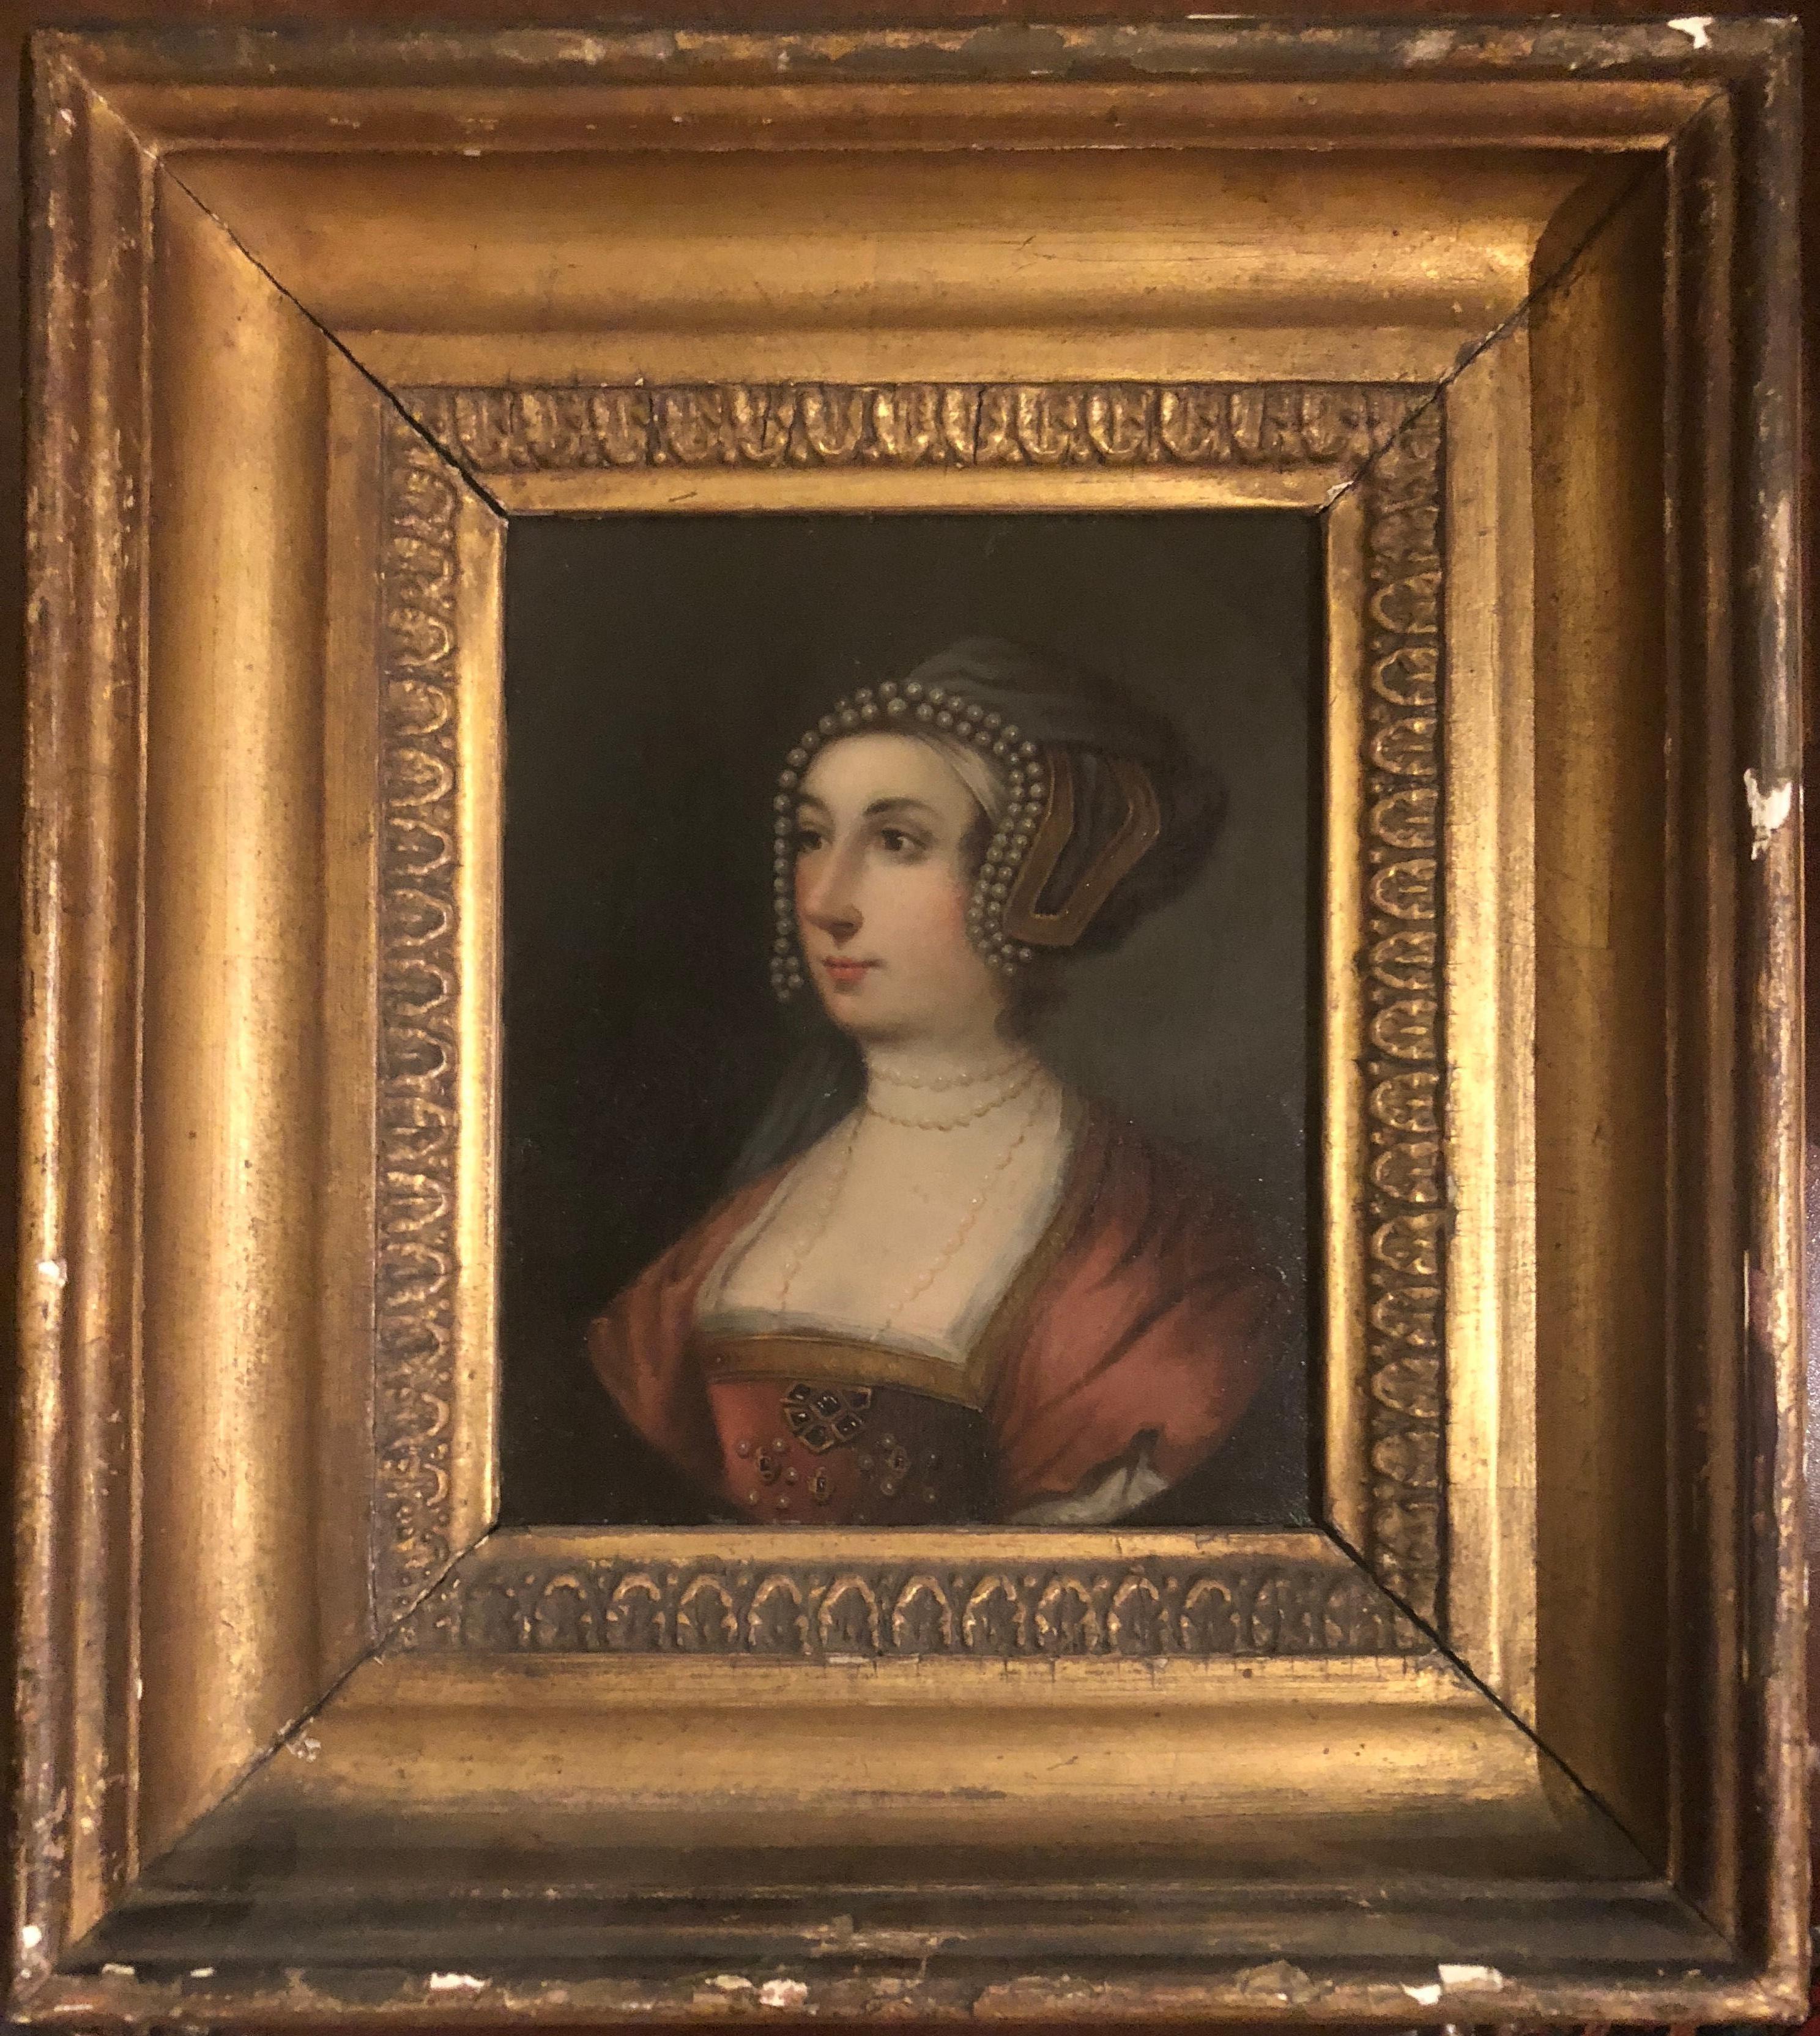 Unknown Figurative Painting - An Exquisite and Rare Portrait of Ann Boleyn (circa 1500-1536), Queen of England